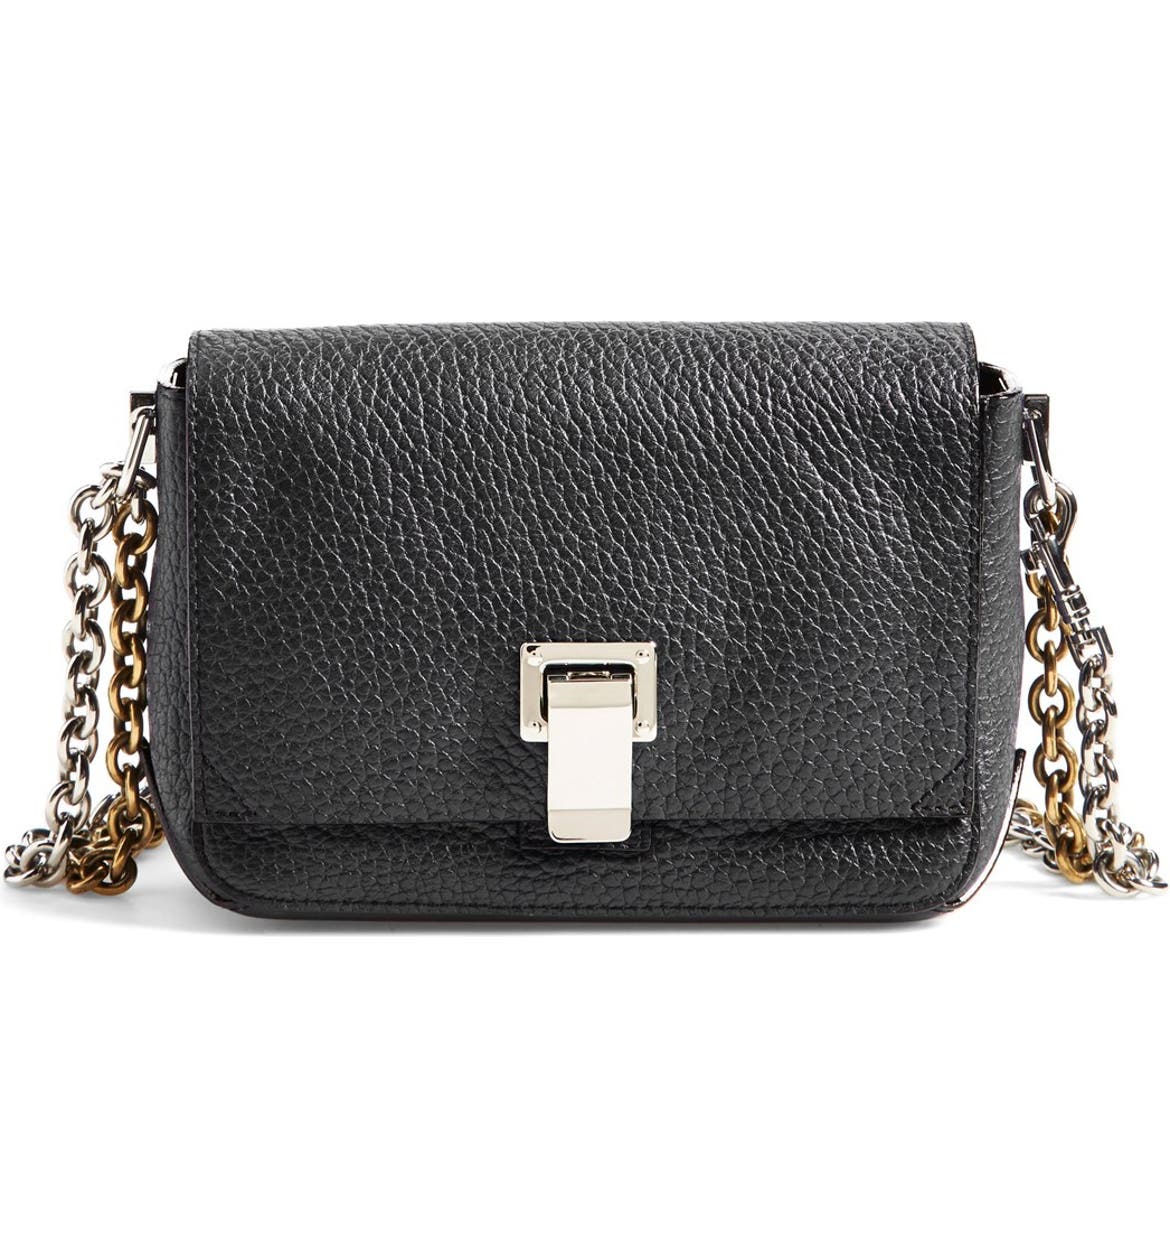 Proenza Schouler 'Small Courier' Pebbled Leather Crossbody Bag | Nordstrom